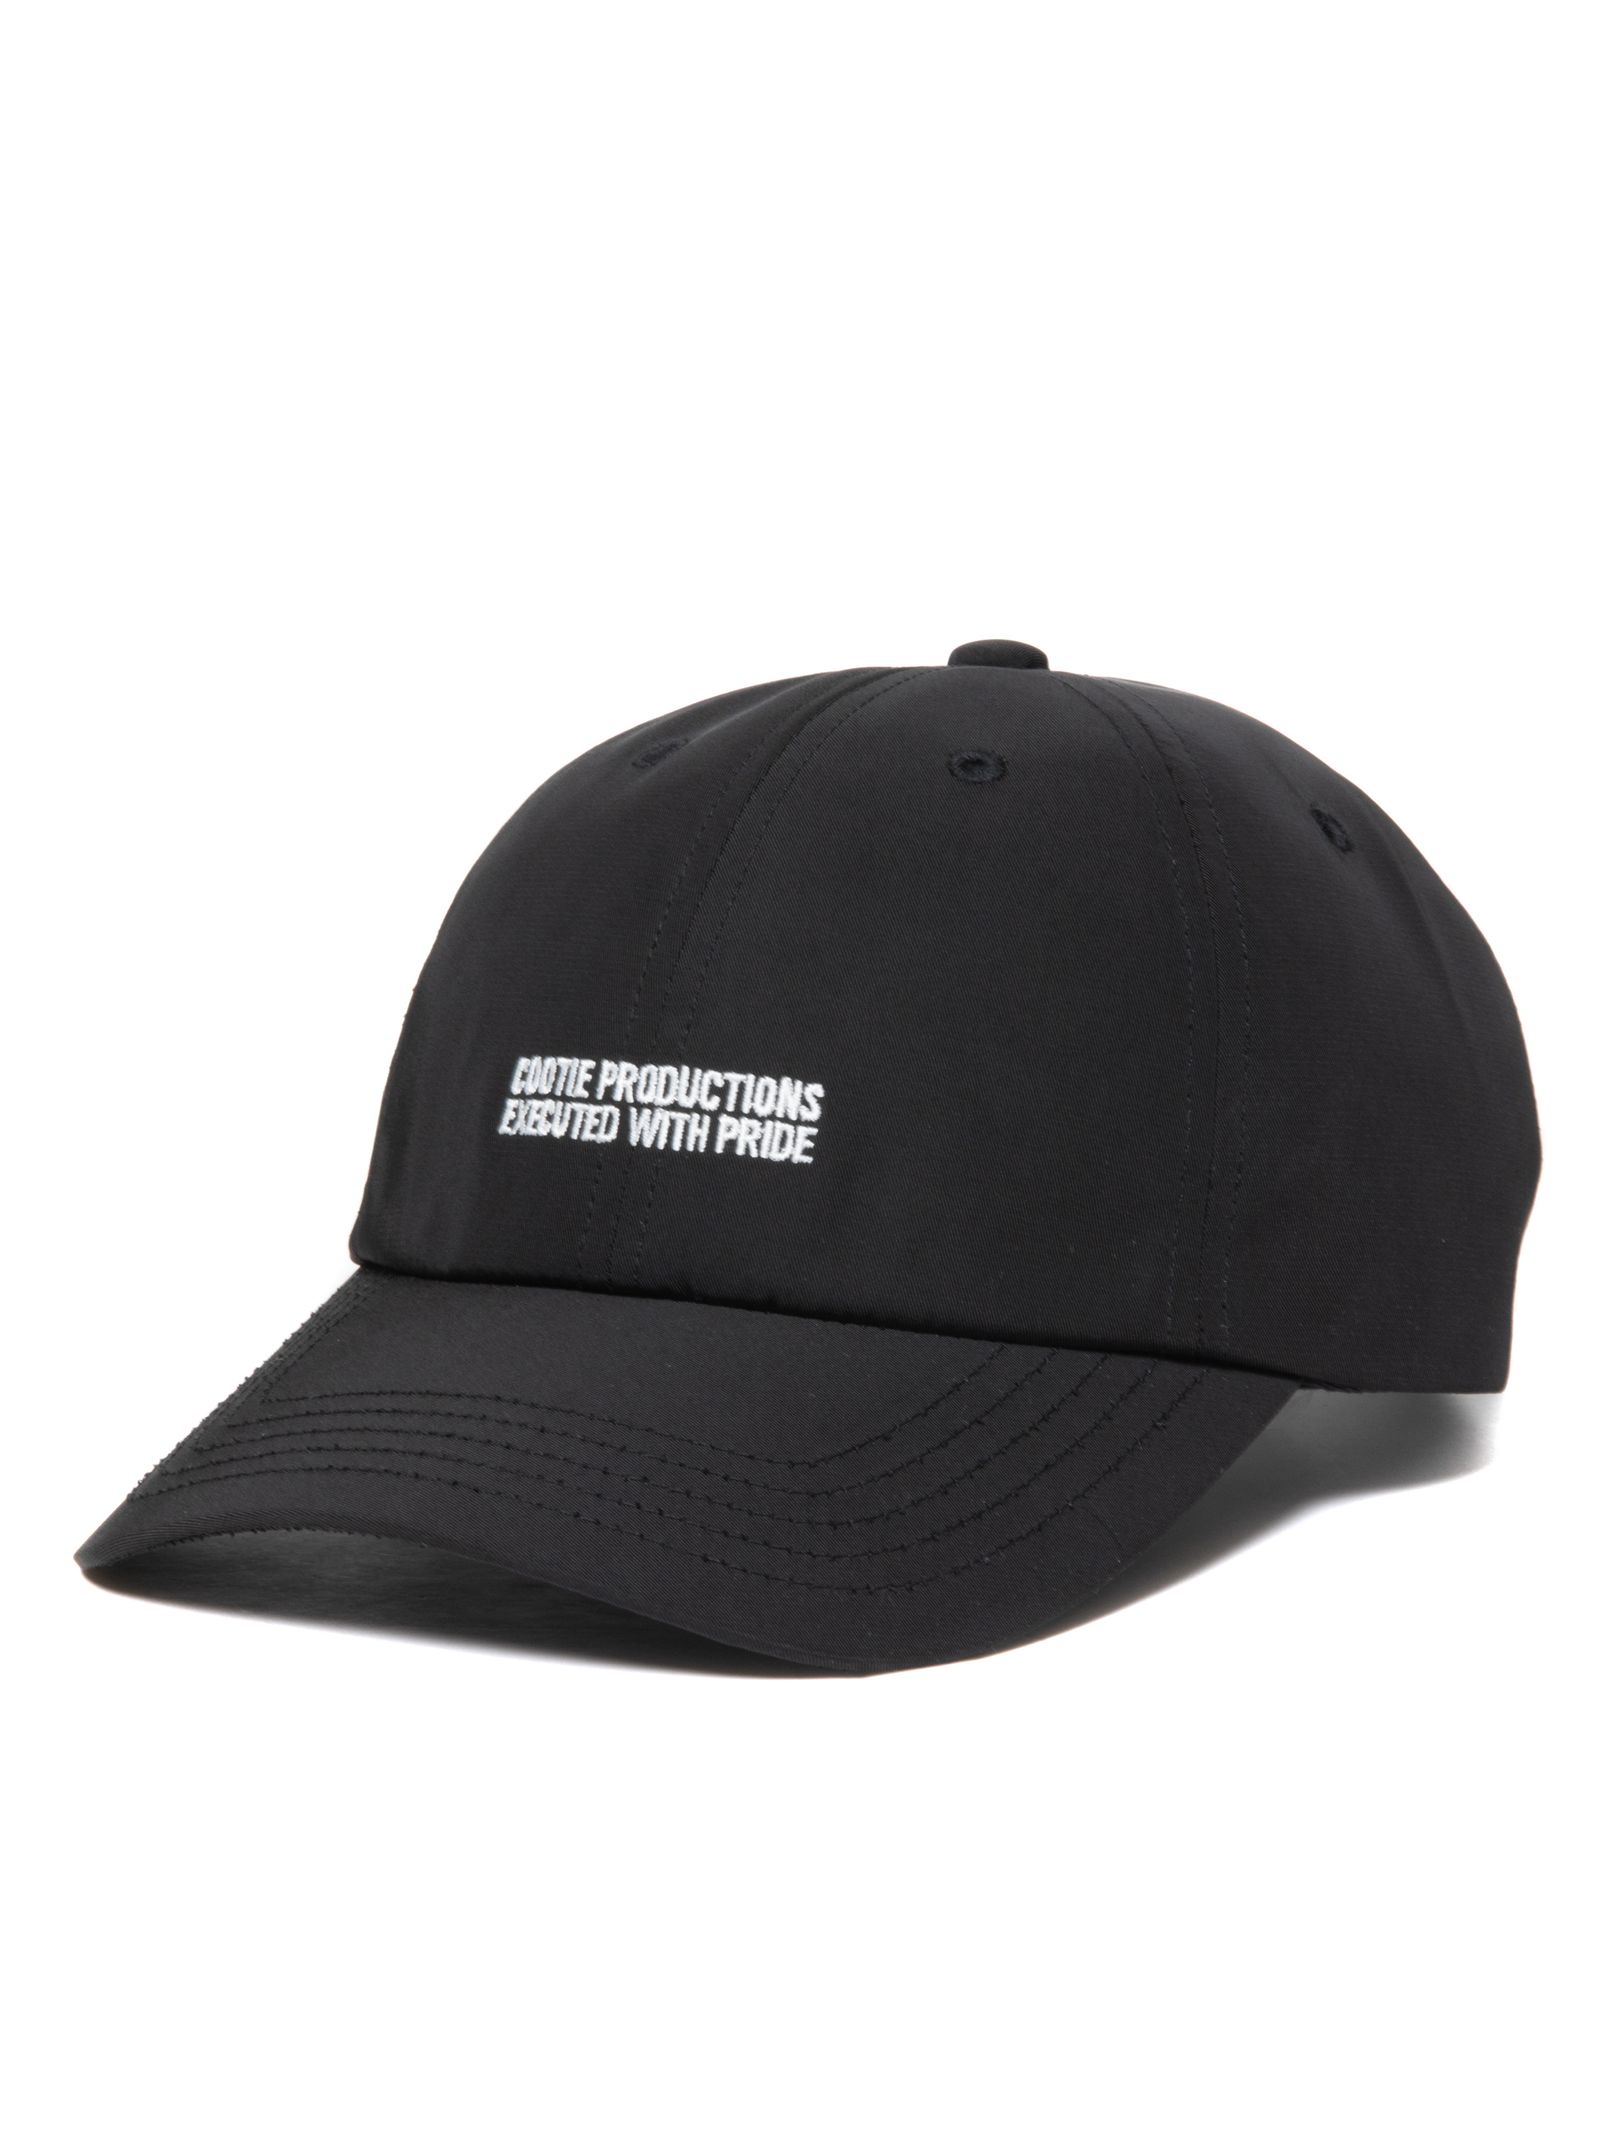 COOTIE PRODUCTIONS - POLYESTER 6 PANEL CAP (BLACK 